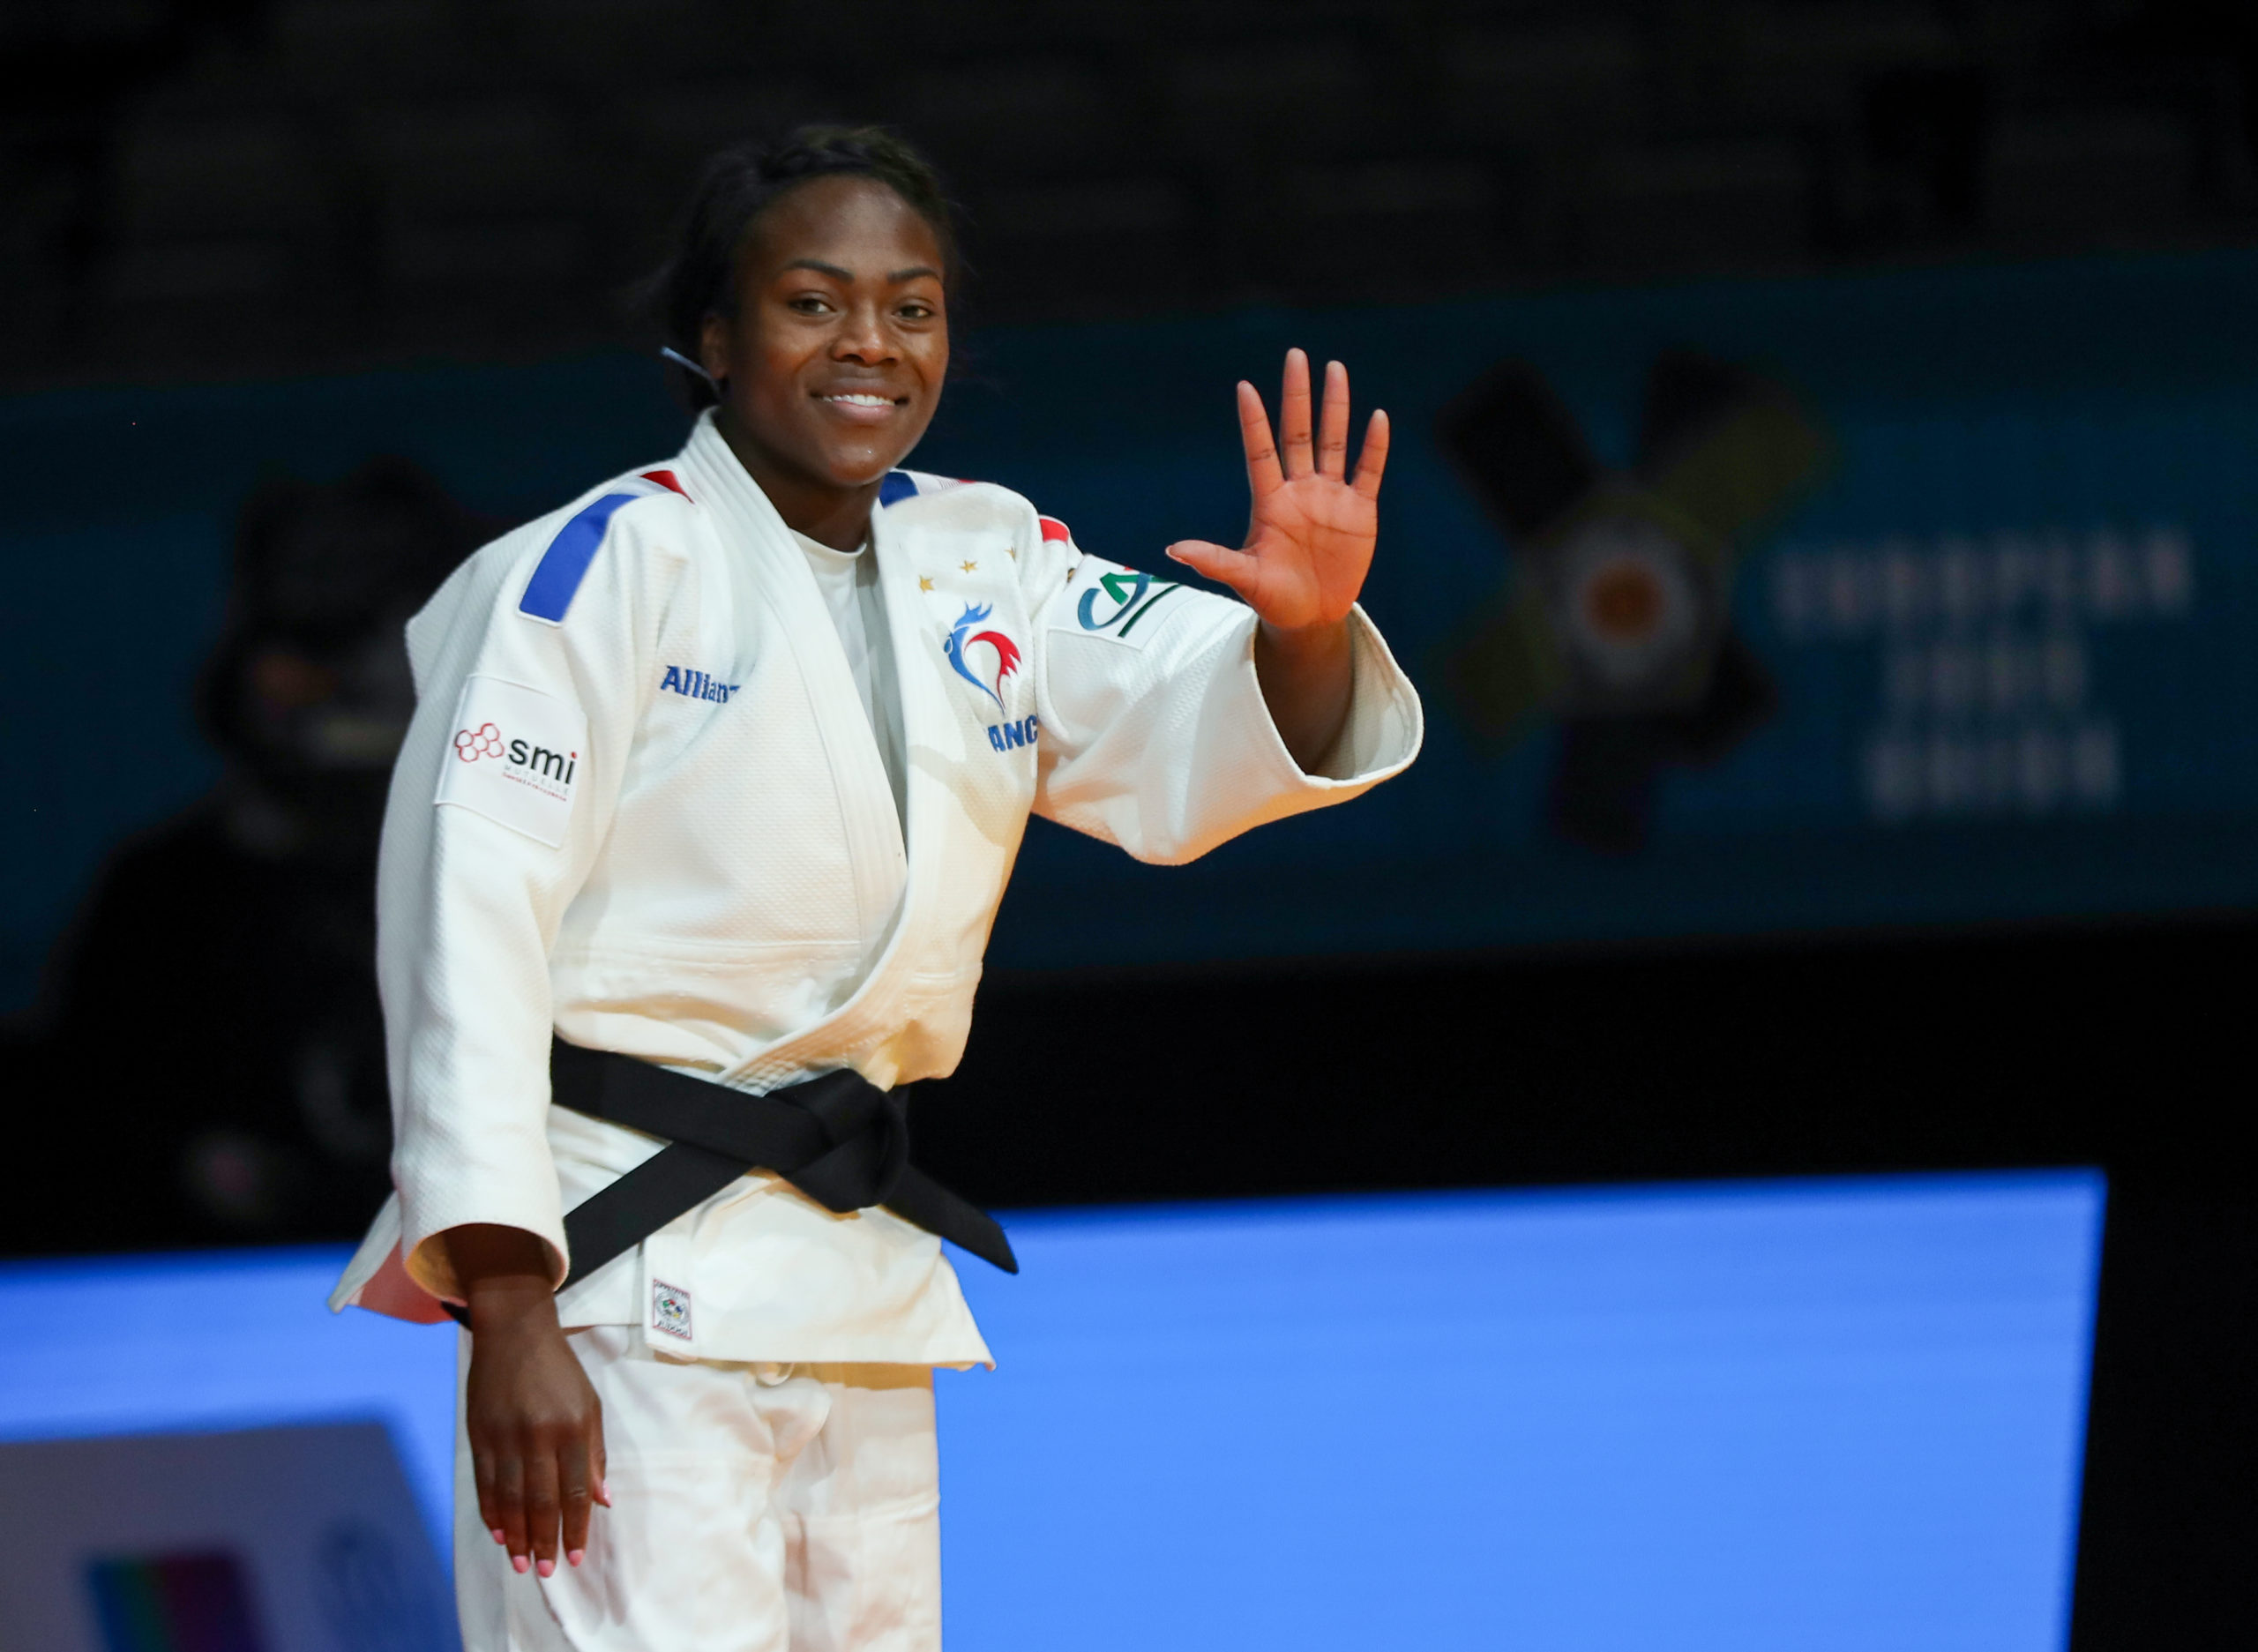 TOP-PLAYER: AGBEGNENOU CONTINUES HER SEIGE OF THE -63KG CATEGORY